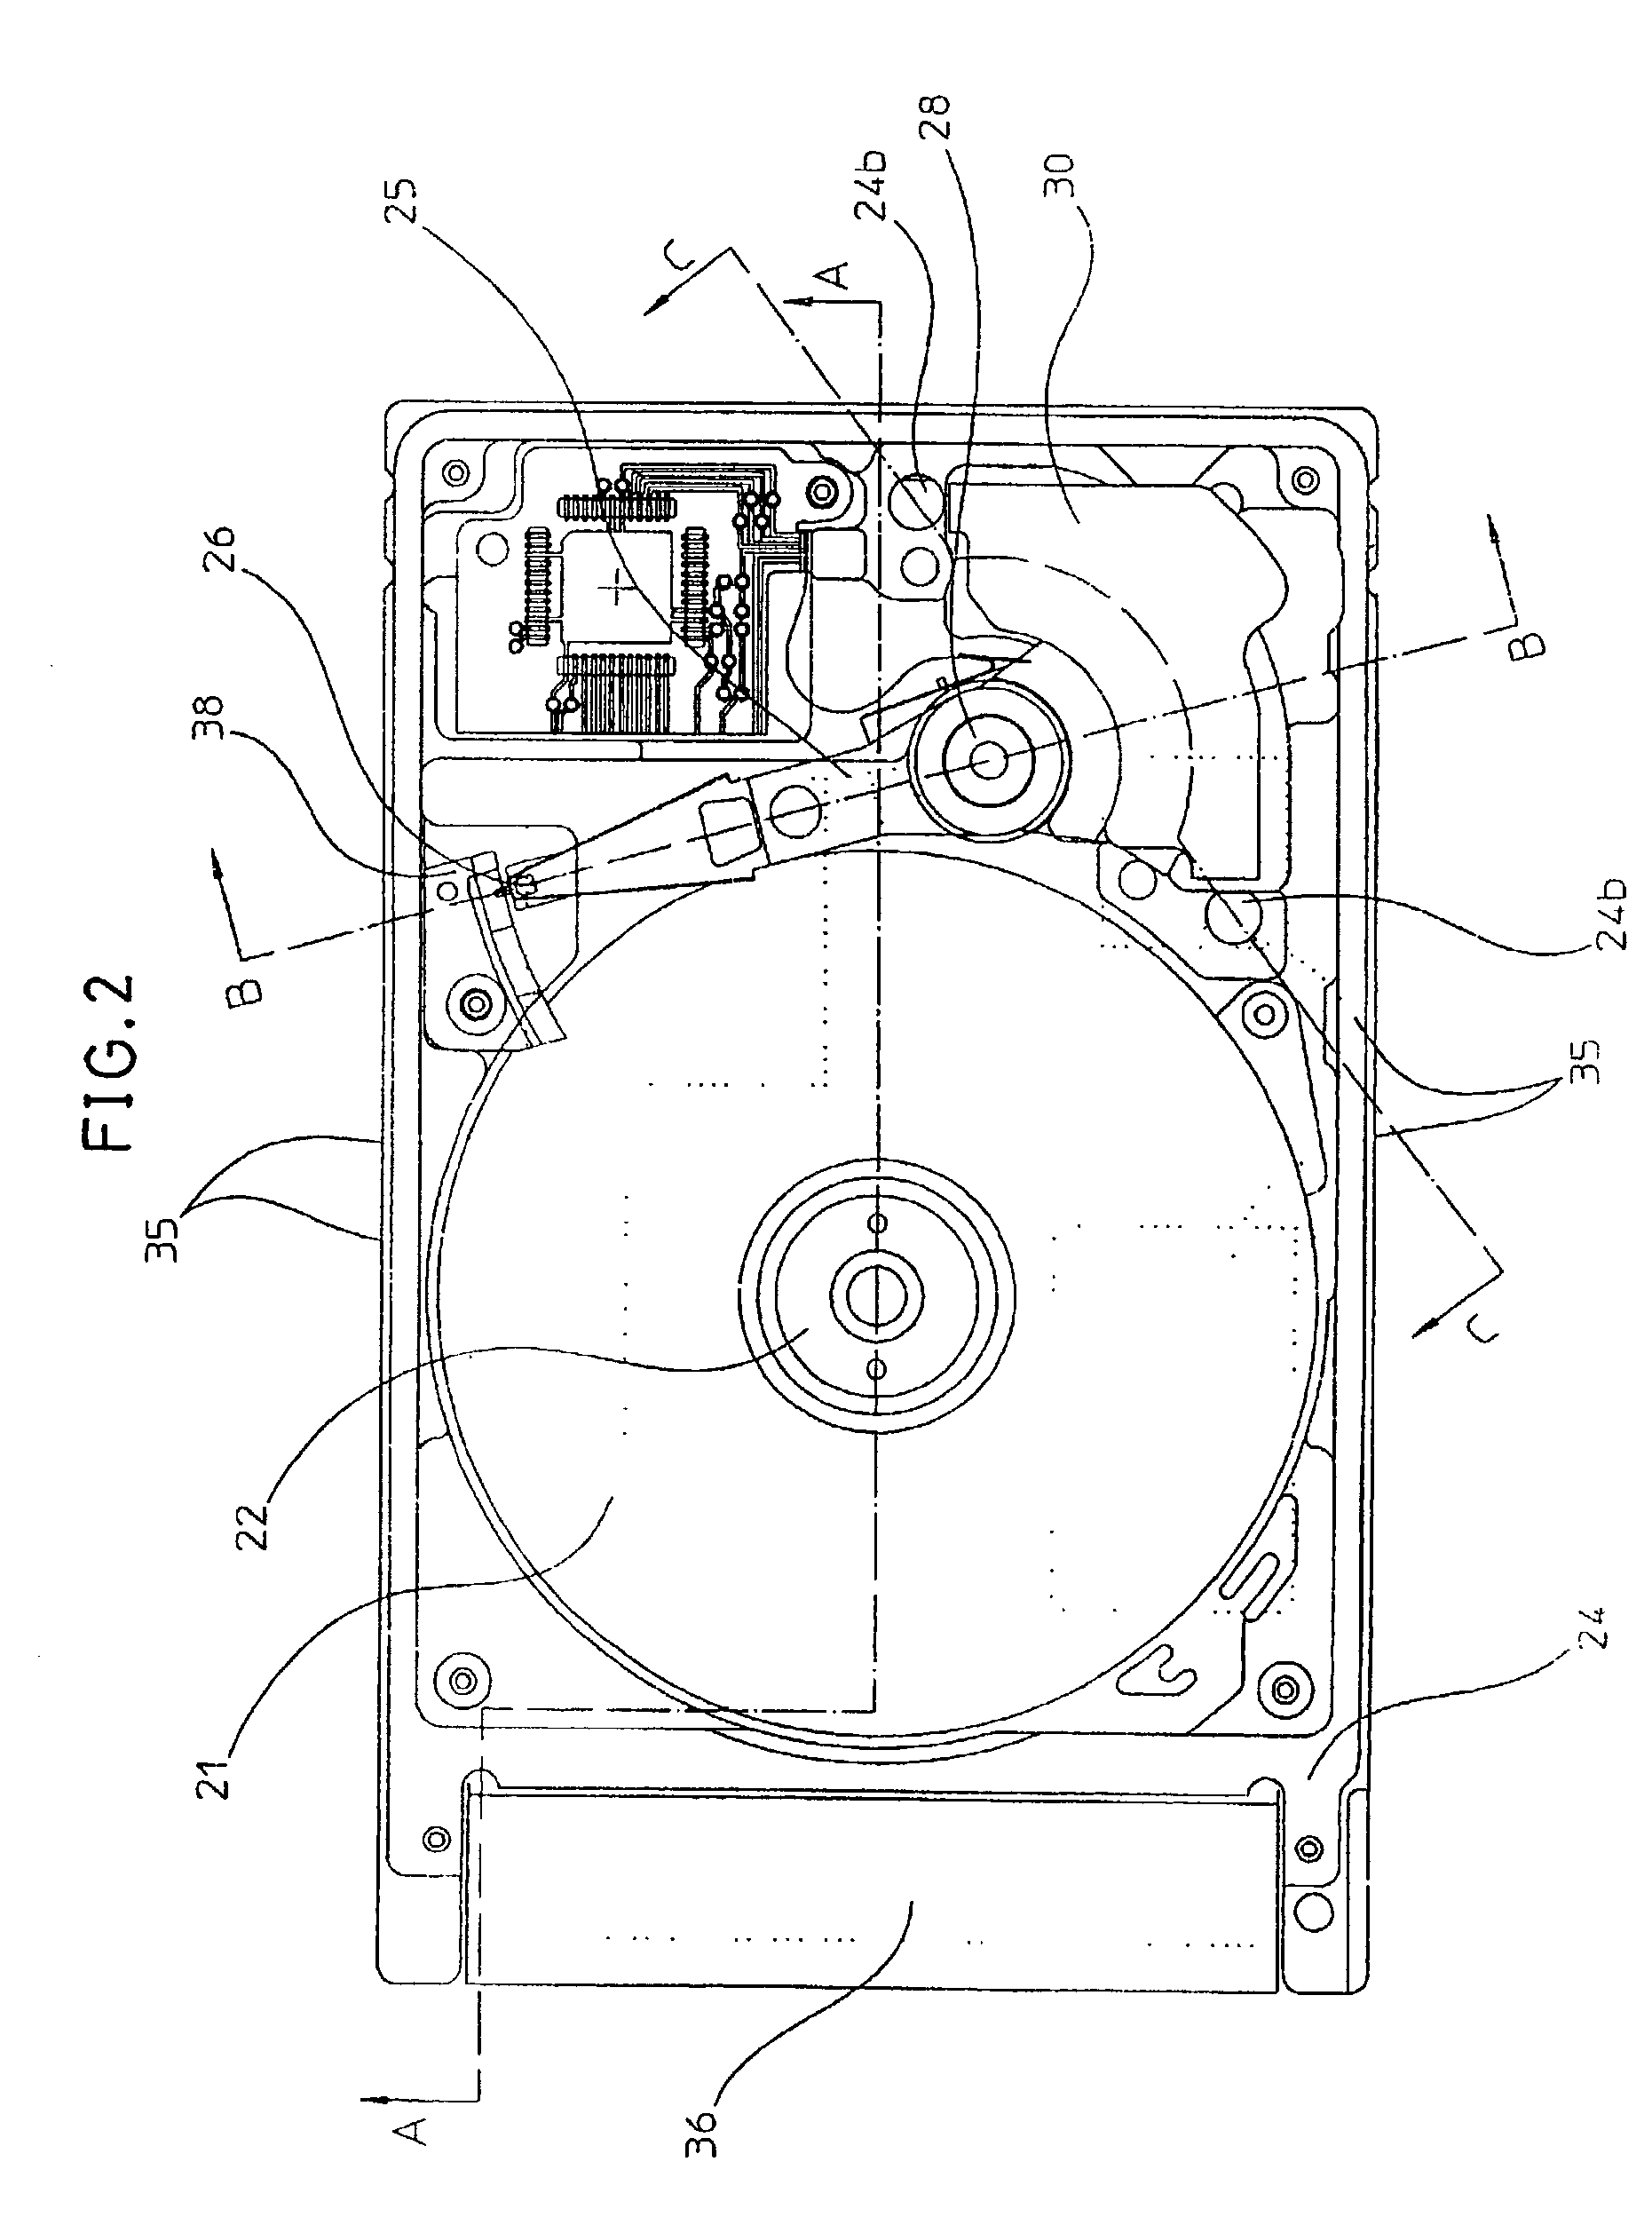 Disk device